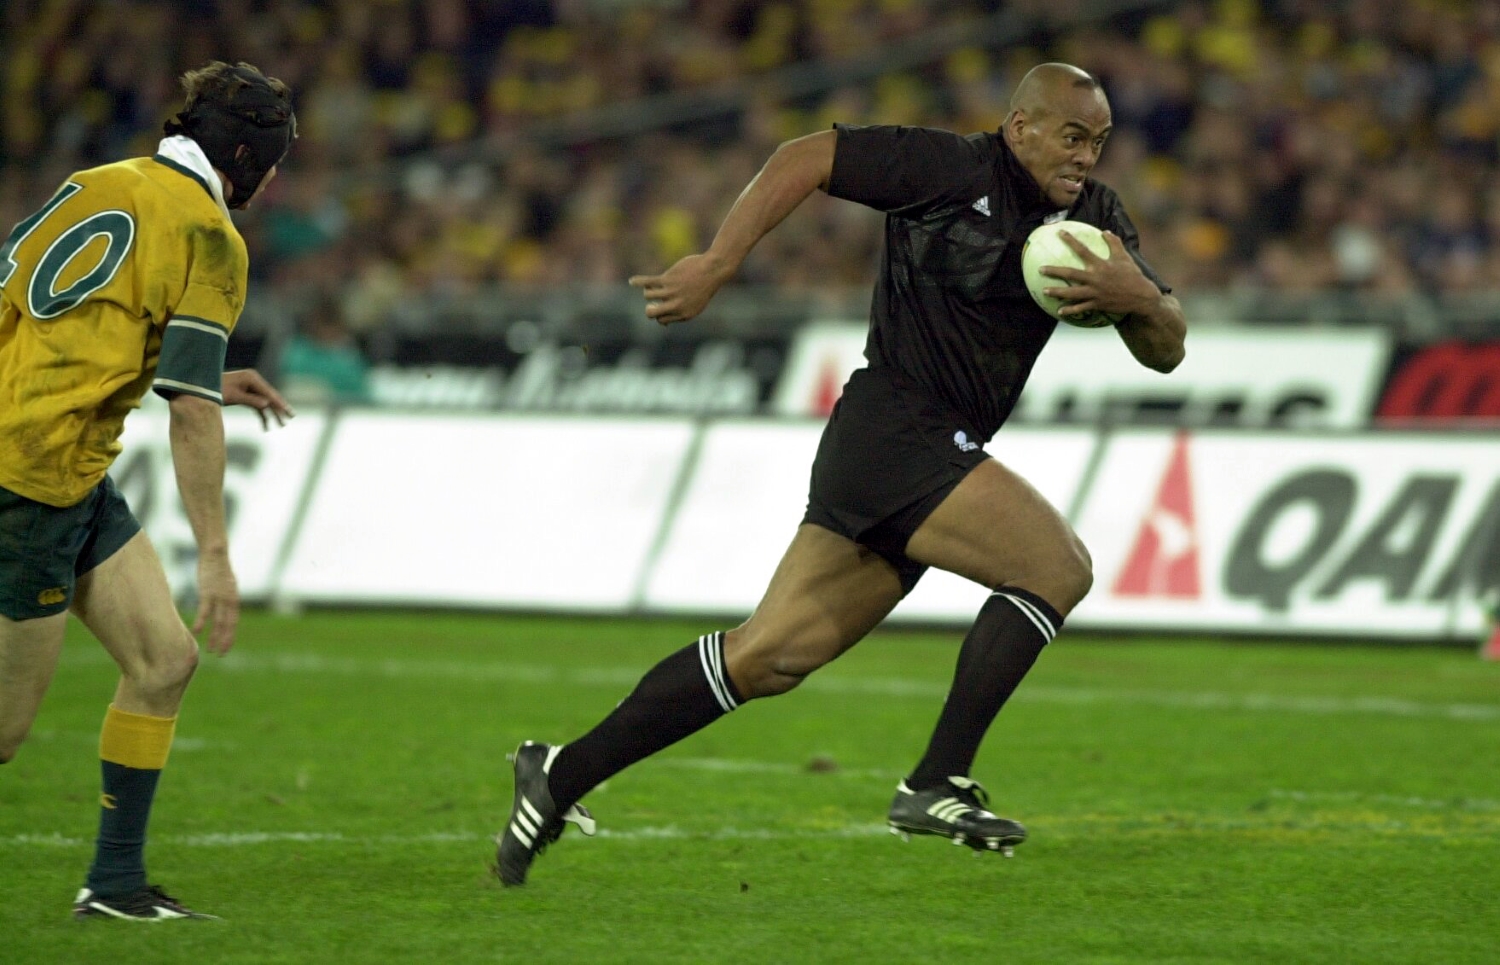 The New Zealand All Blacks Experienced a Devastating Loss With the Unexpected Death of Rugby Legend Jonah Lomu